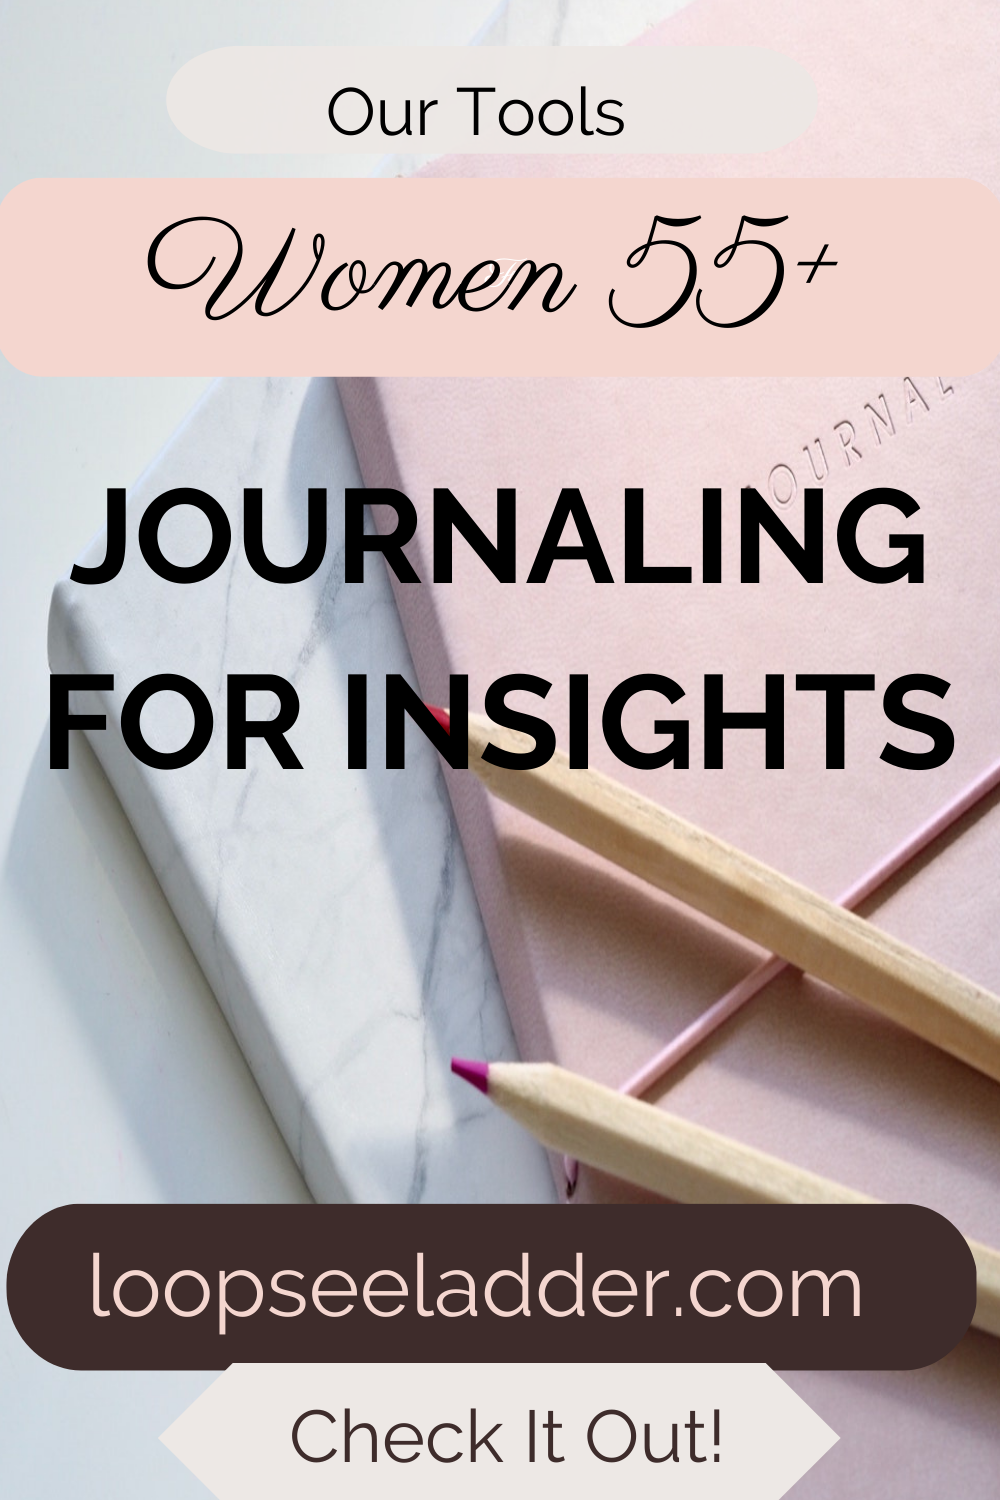 Journaling for Insights